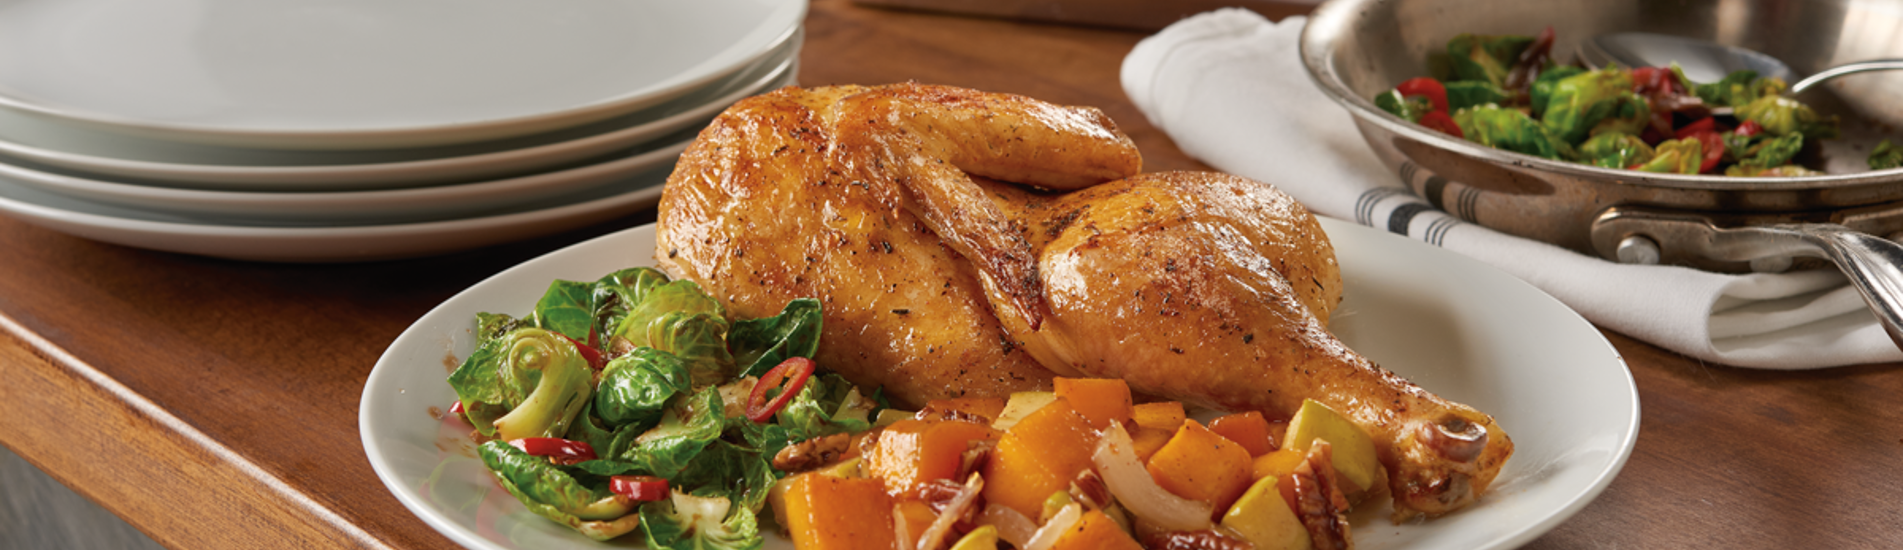 Welcome to Cheney Brothers Chicken and Turkey product website.